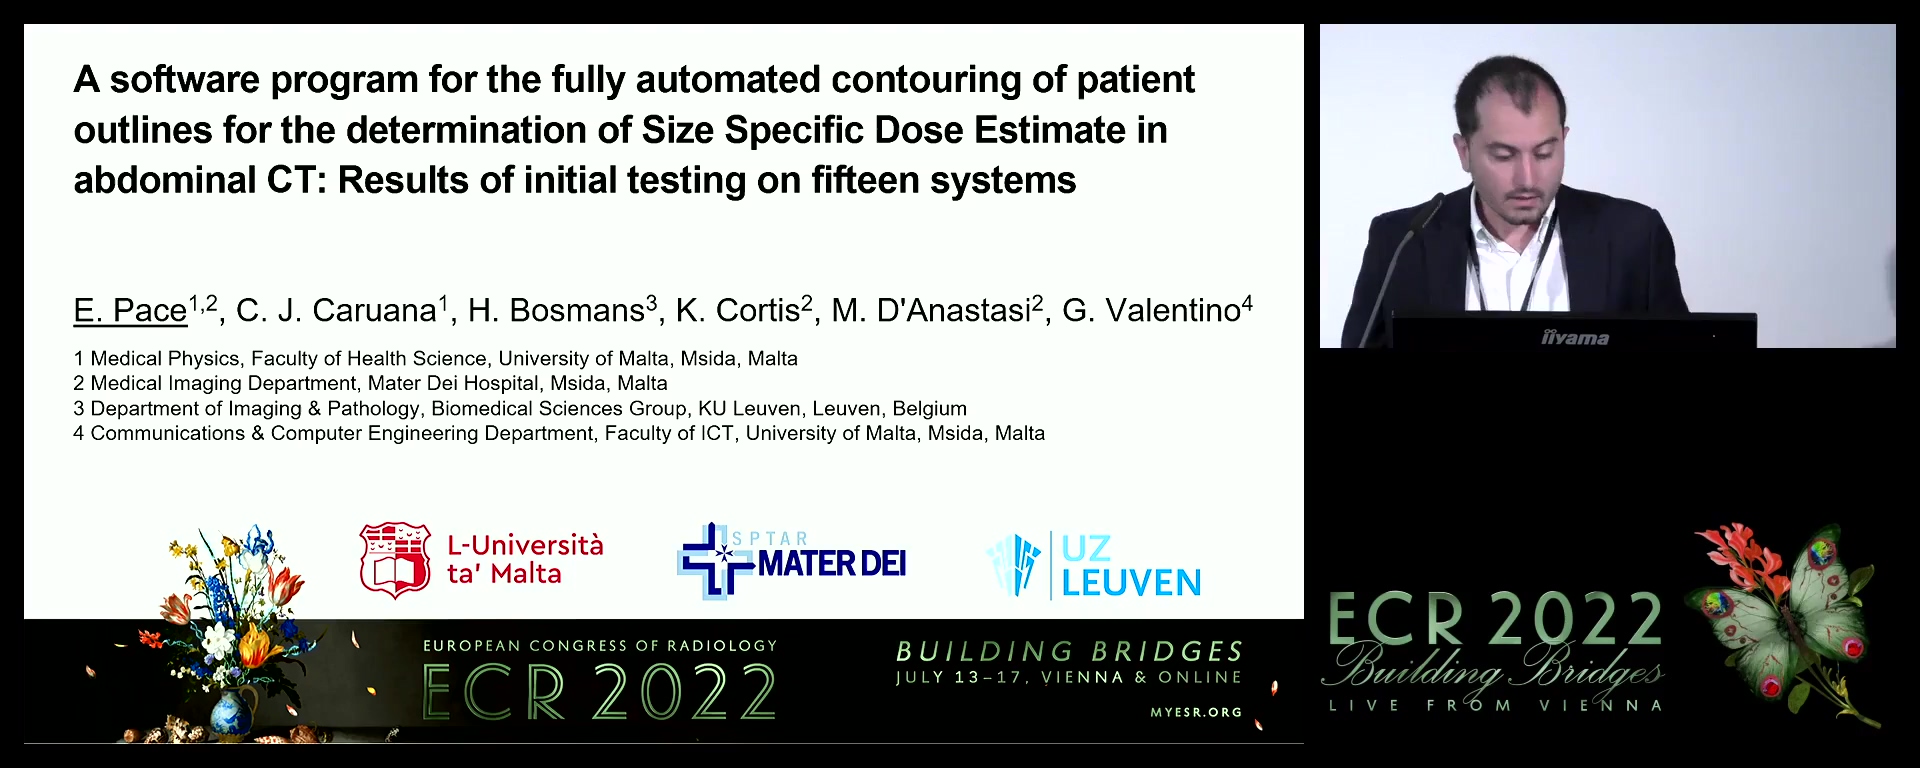 A software program for the fully automated contouring of patient outlines for the determination of size specific dose estimate in abdominal CT: results of initial testing on 17 systems - Eric Pace, Msida / MT